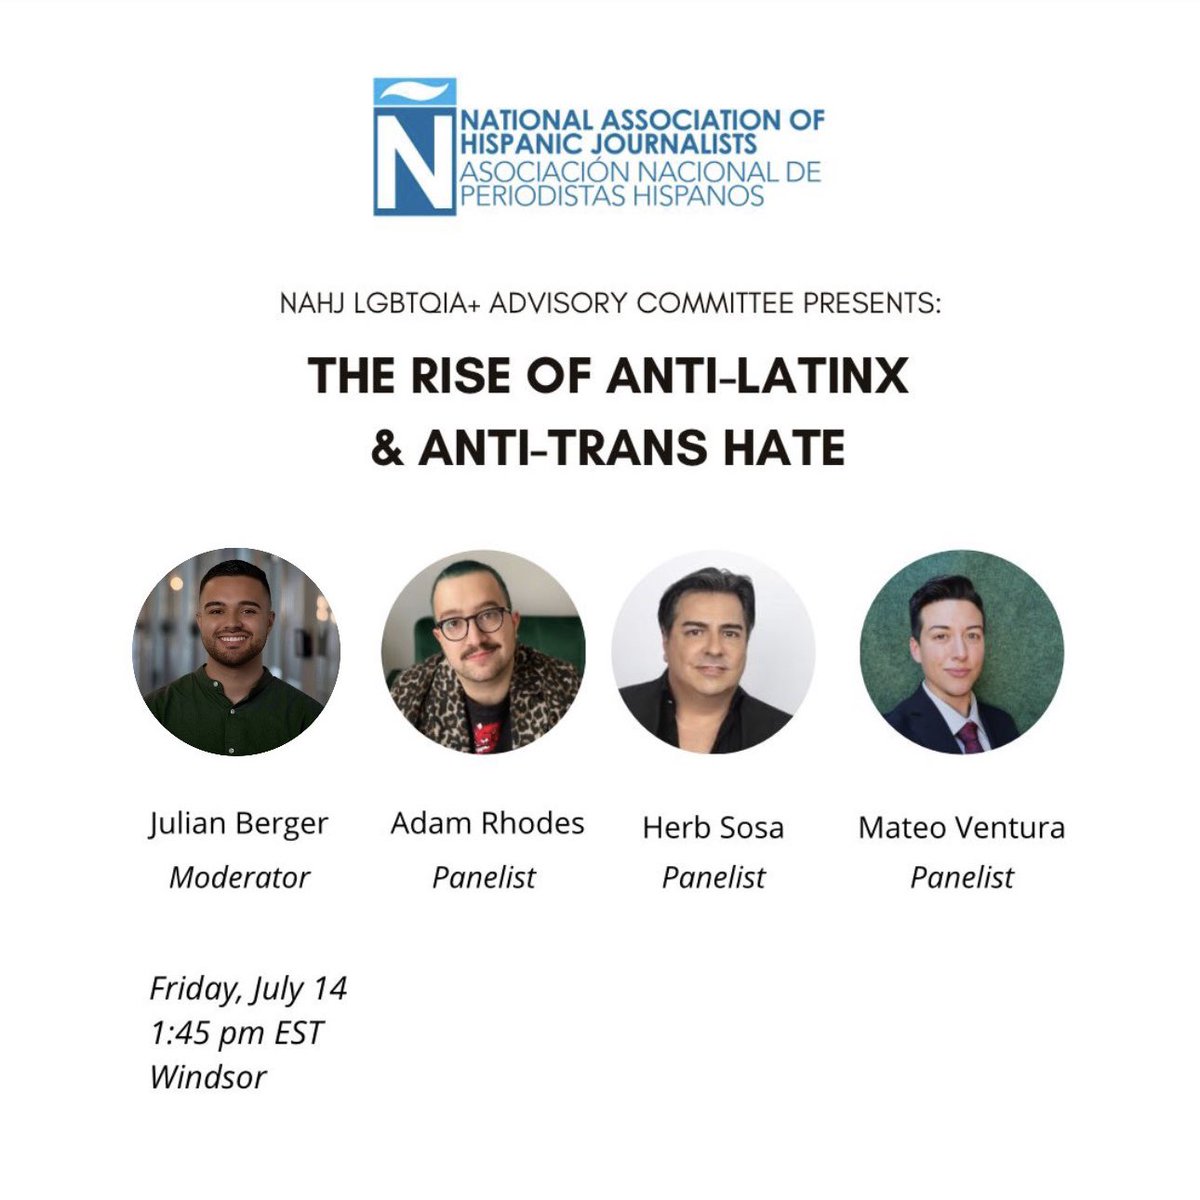 Today’s the day! I will be moderating this panel on Anti-Latinx and Anti-Trans hate this afternoon. If you are at #NAHJ2023, please stop by! 🏳️‍🌈🏳️‍⚧️